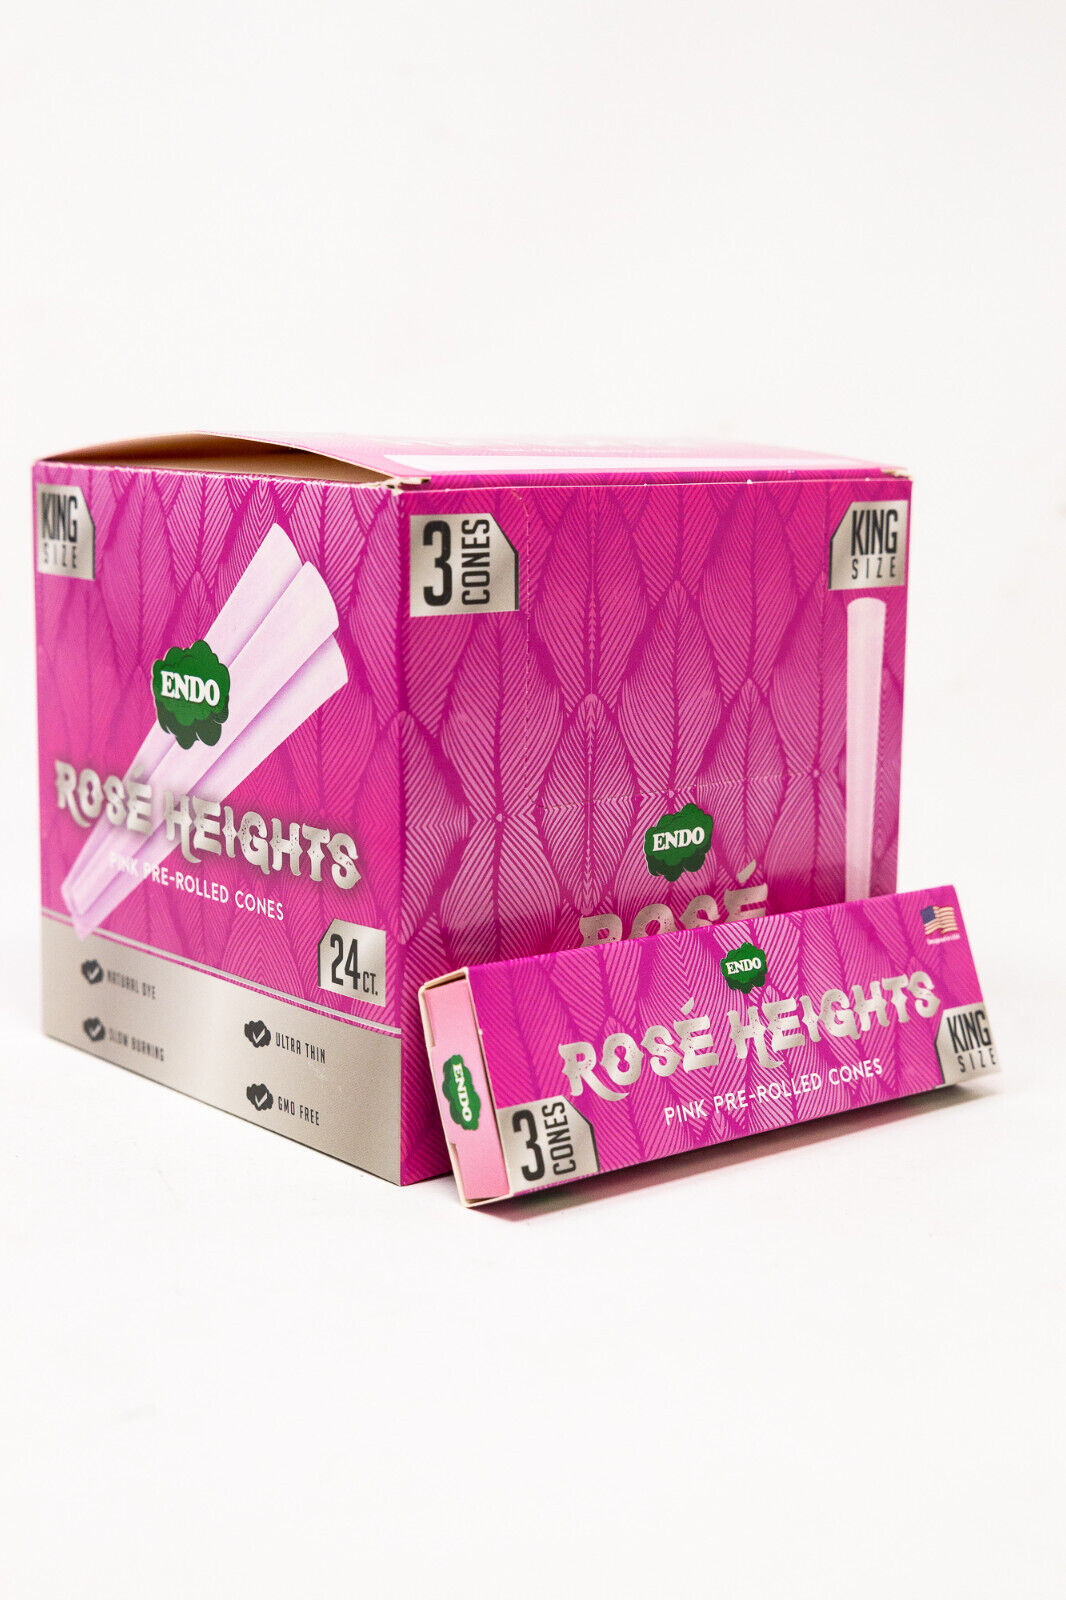 ENDO Rose Heights Premium Pink Pre Rolled King Size Cones - Box